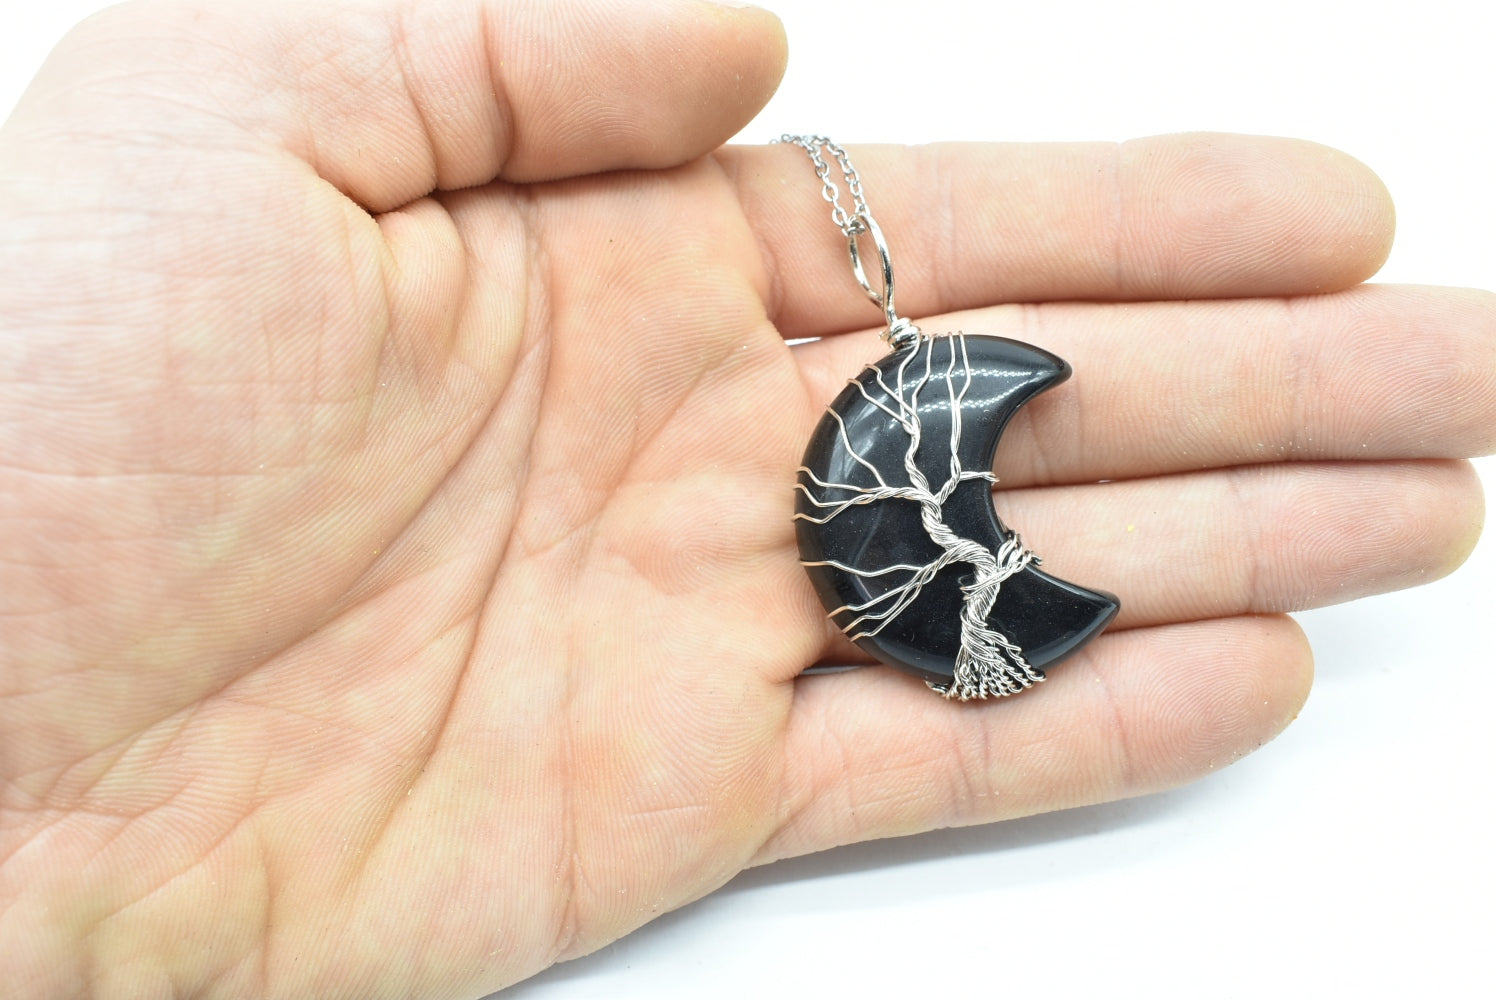 Obsidian Moon Pendant wrapped in silver colored wire